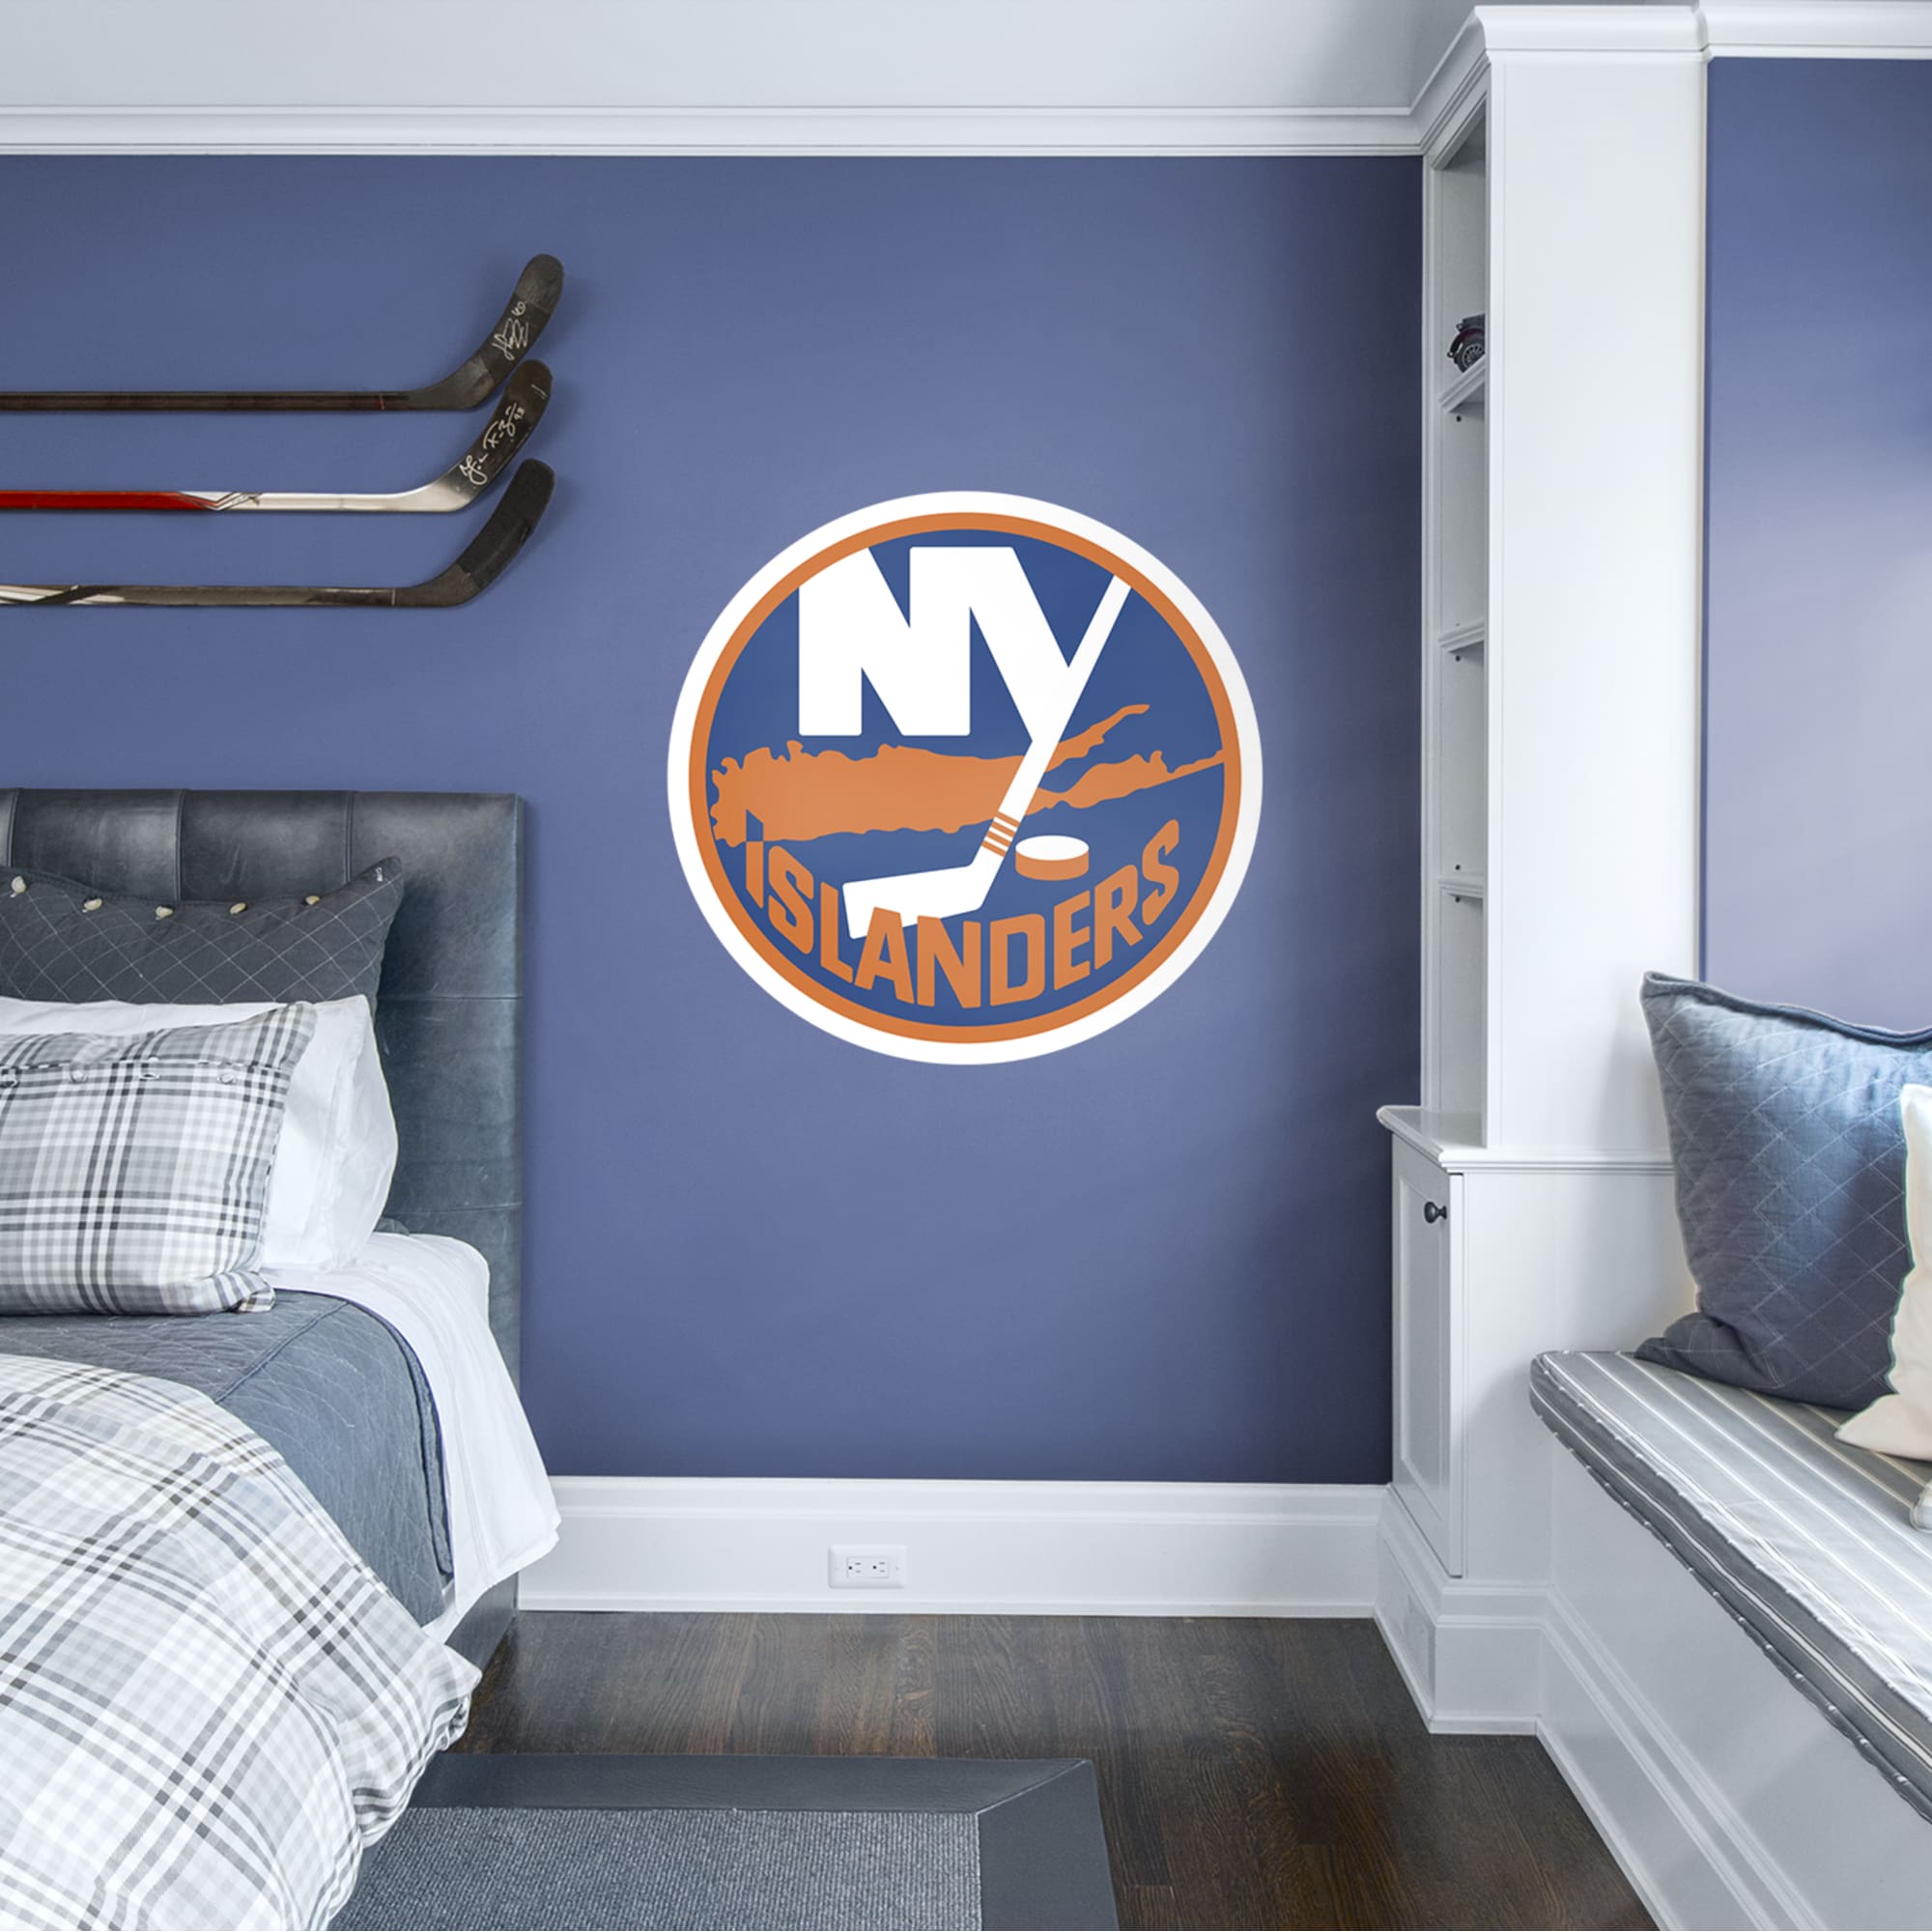 New York Islanders: Logo - Officially Licensed NHL Removable Wall Decal Giant Logo (38"W x 37"H) by Fathead | Vinyl